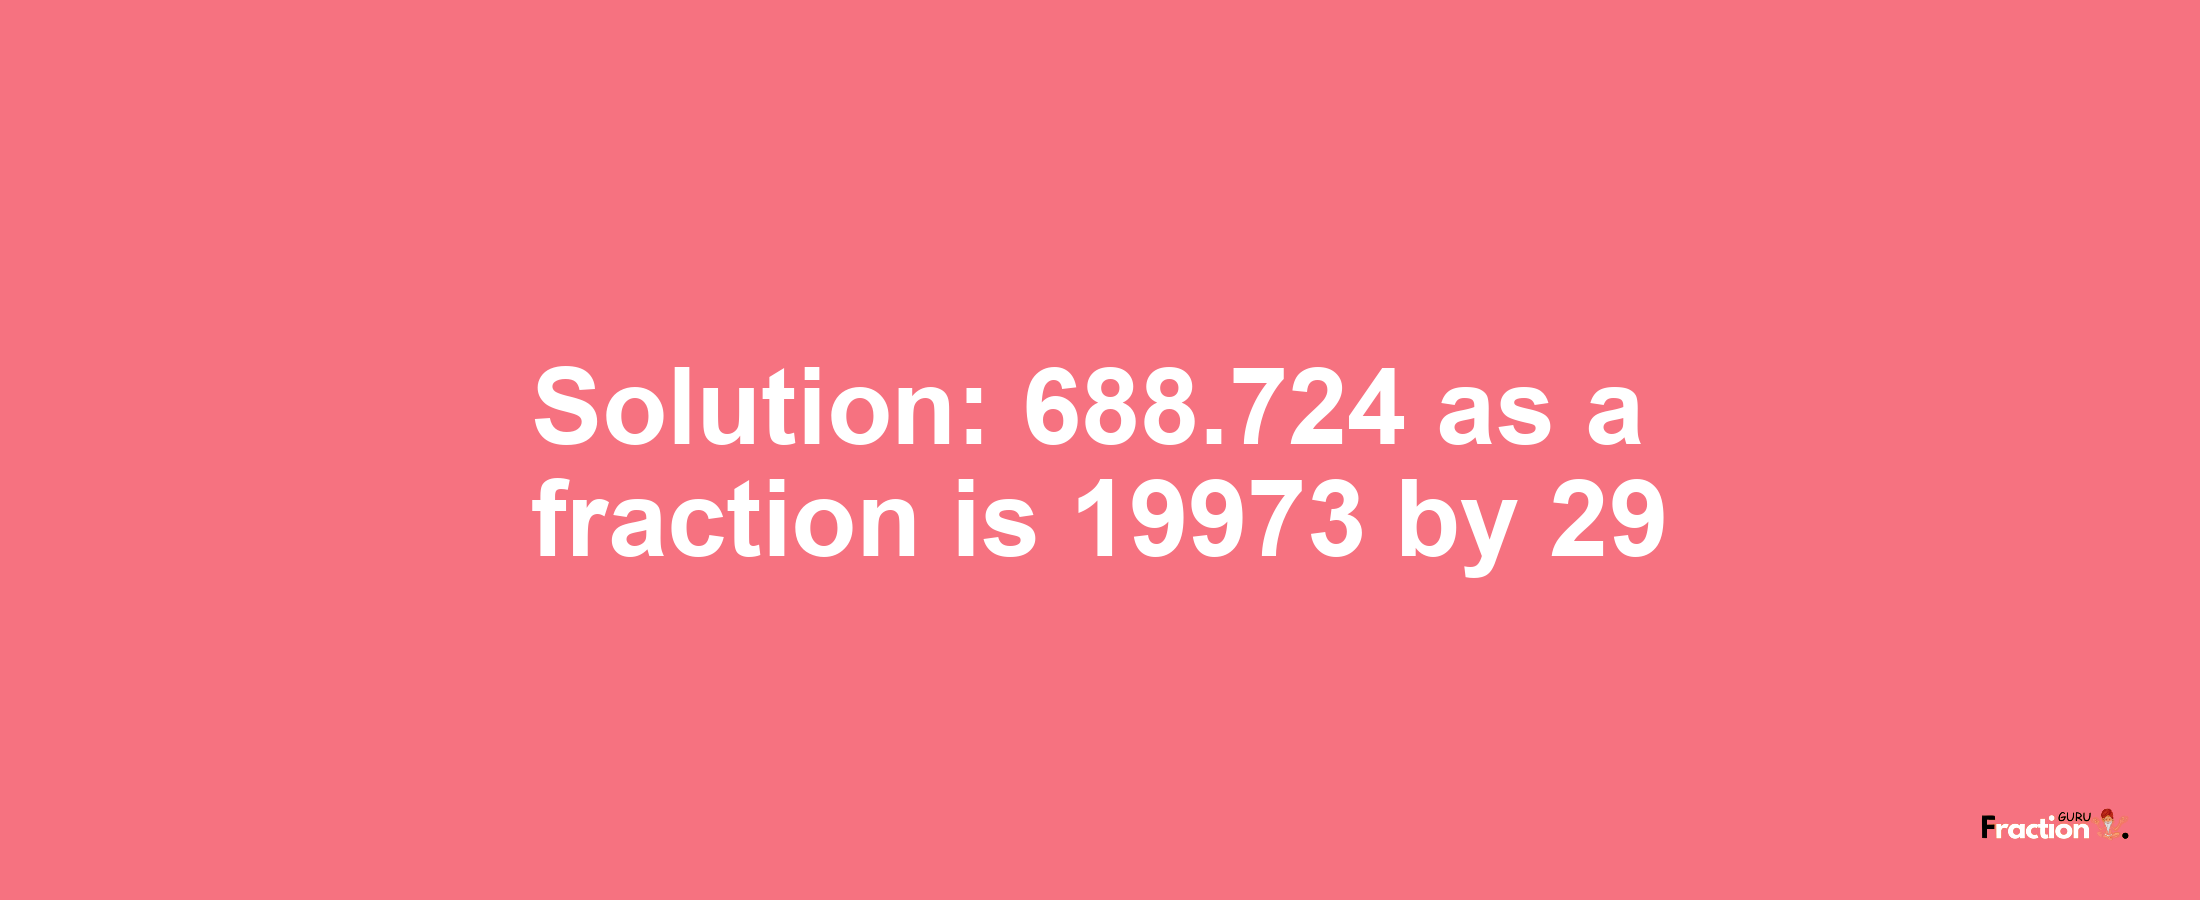 Solution:688.724 as a fraction is 19973/29